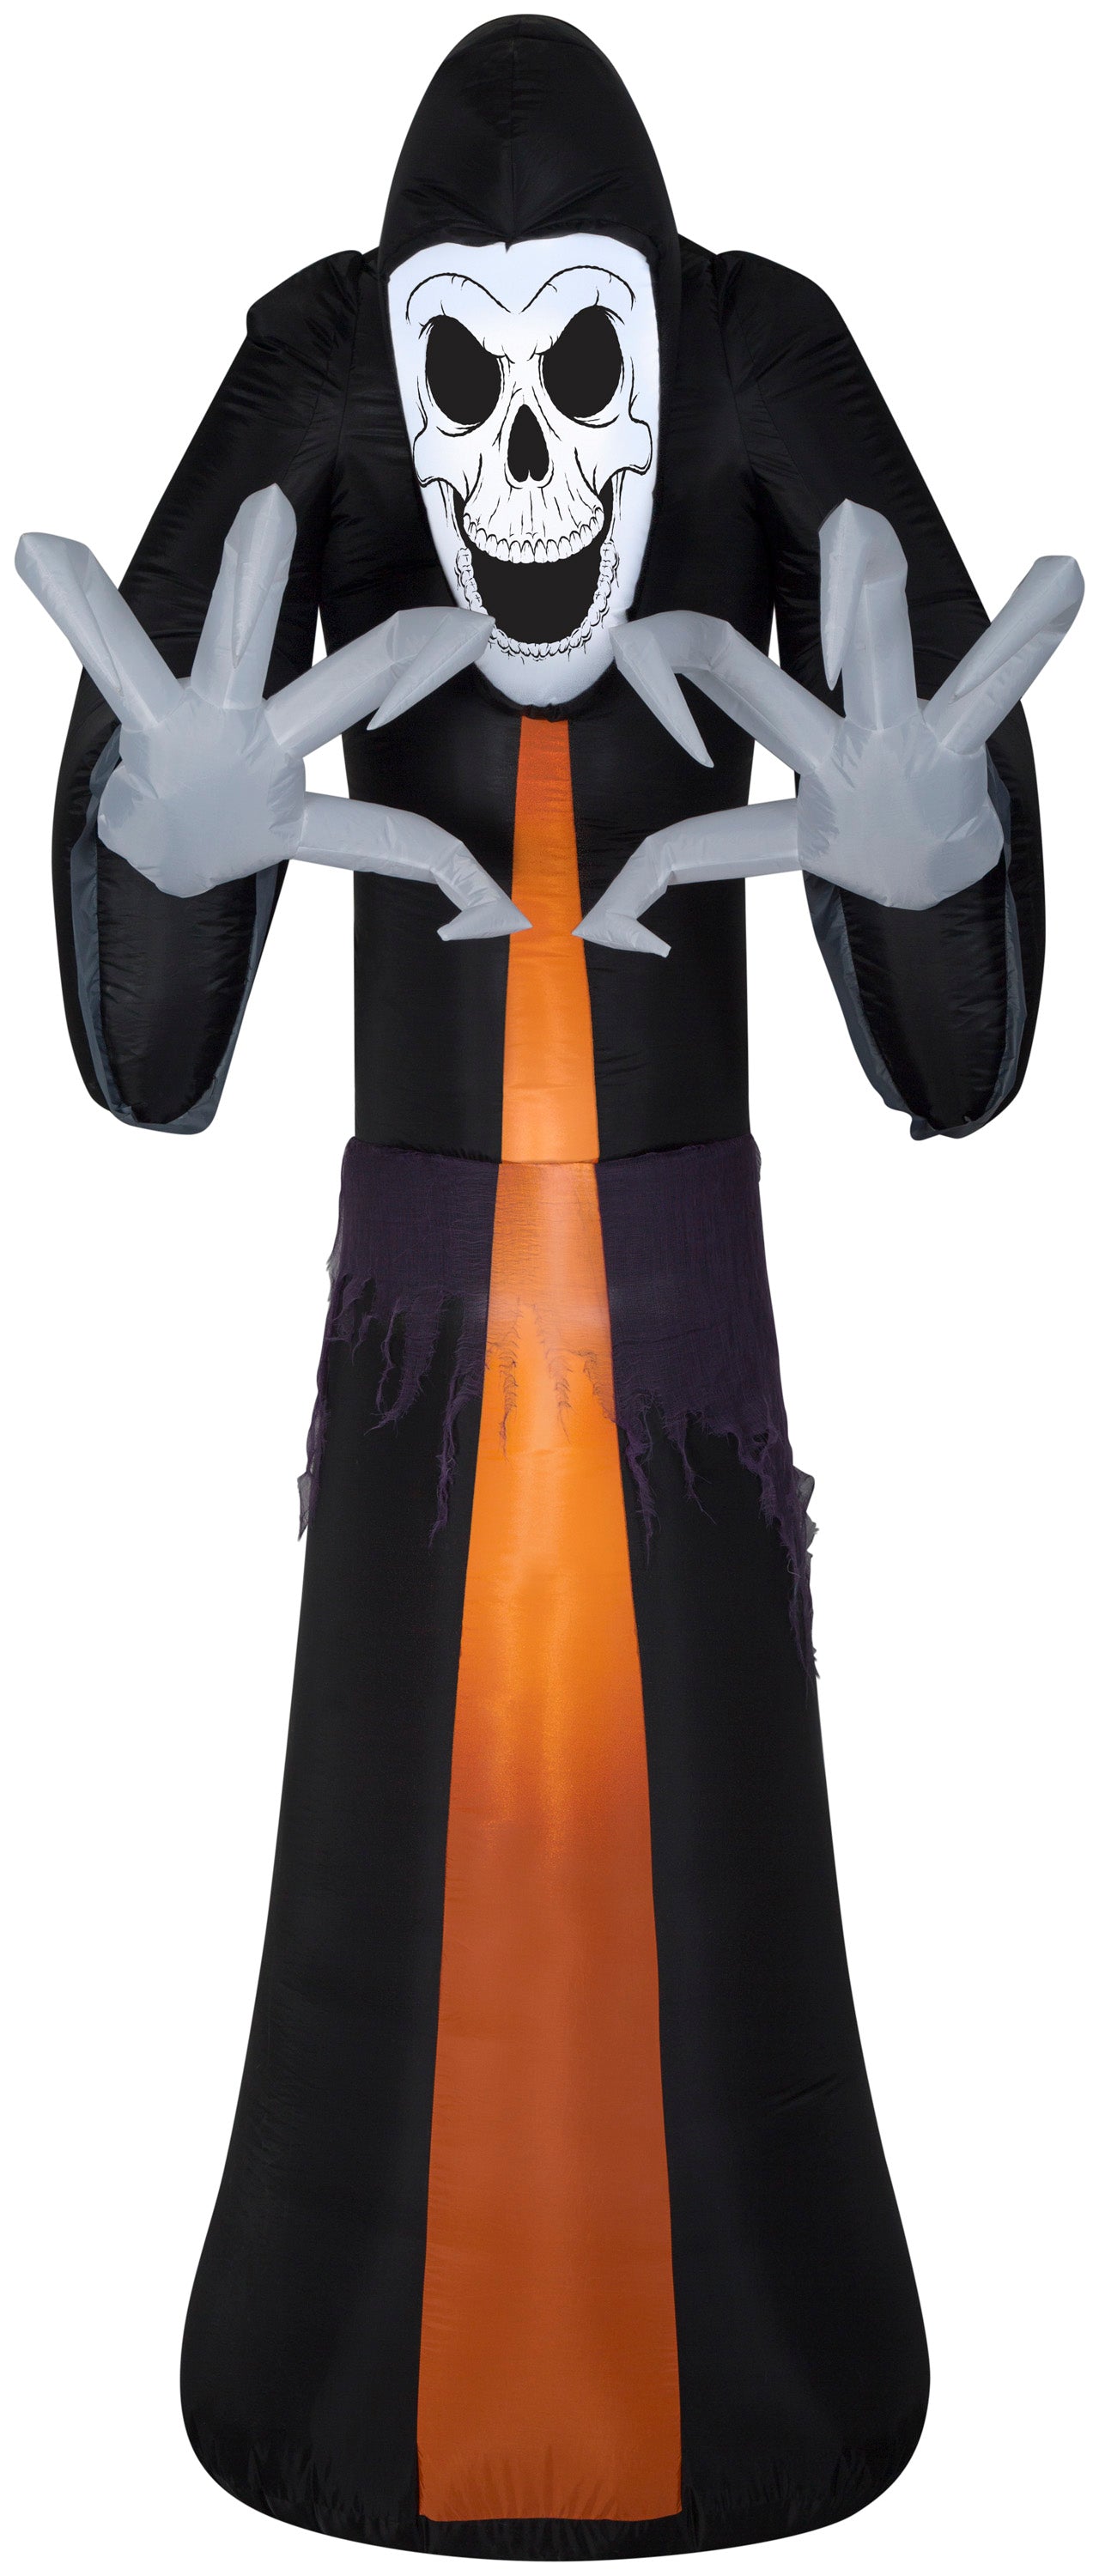 12' Airblown Giant Reaper Halloween Inflatable